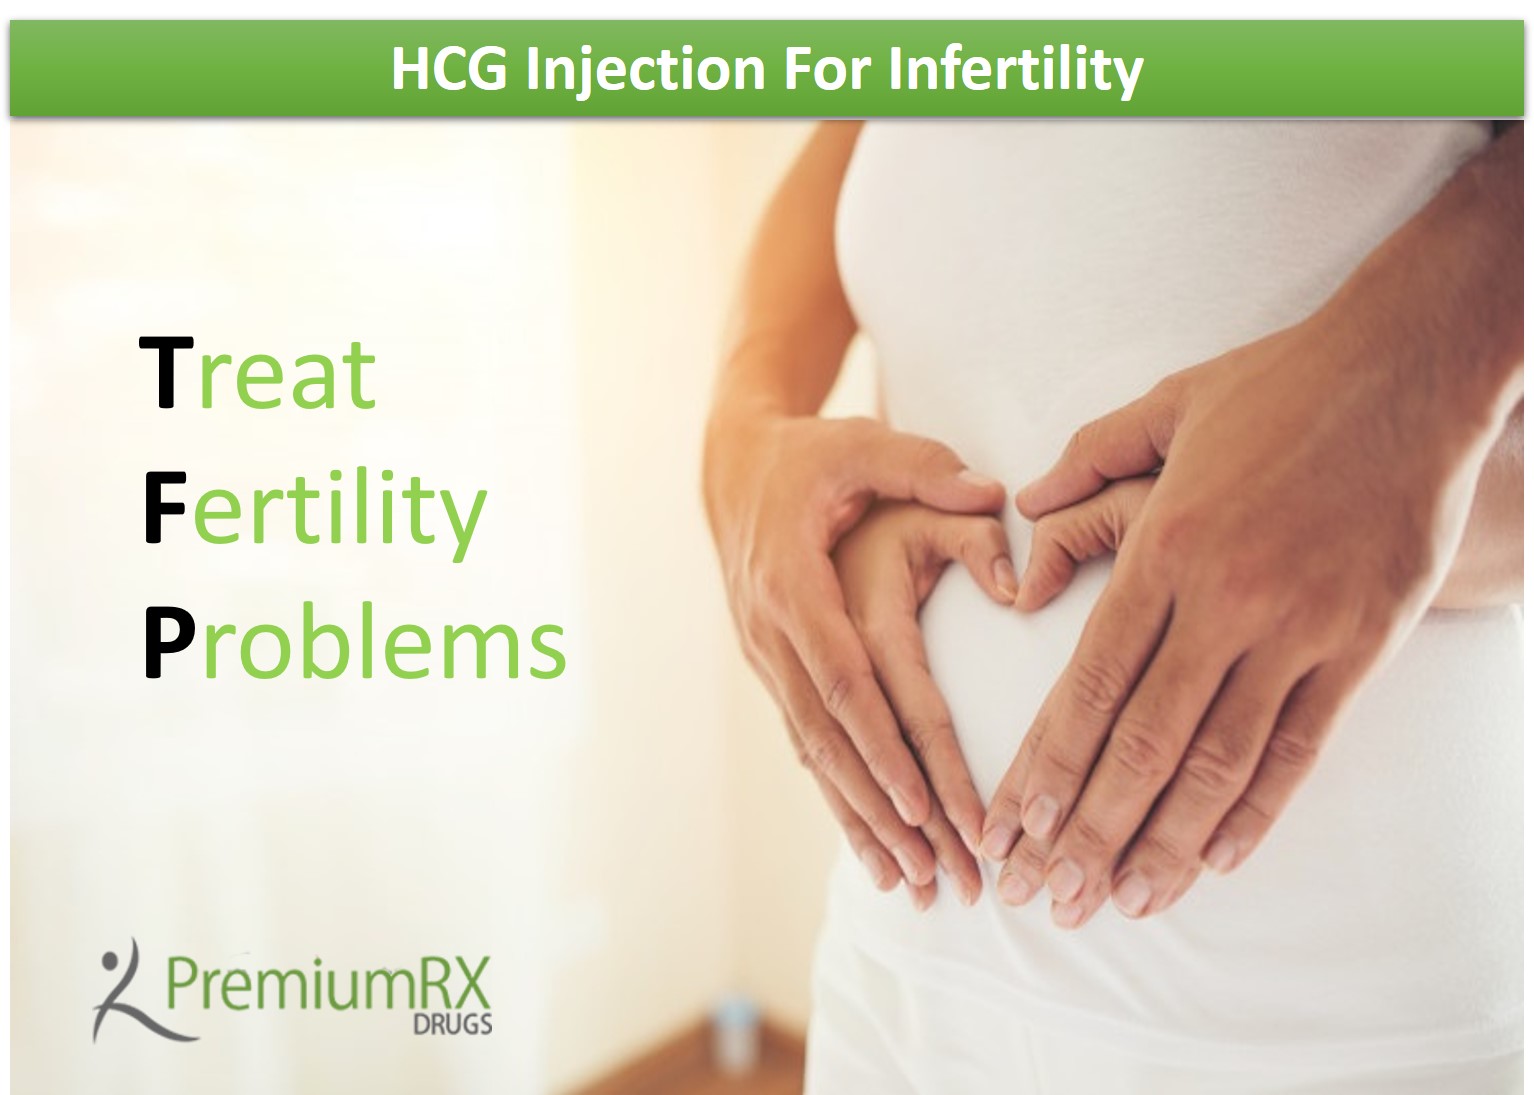 HCG Injection For Infertility and usages